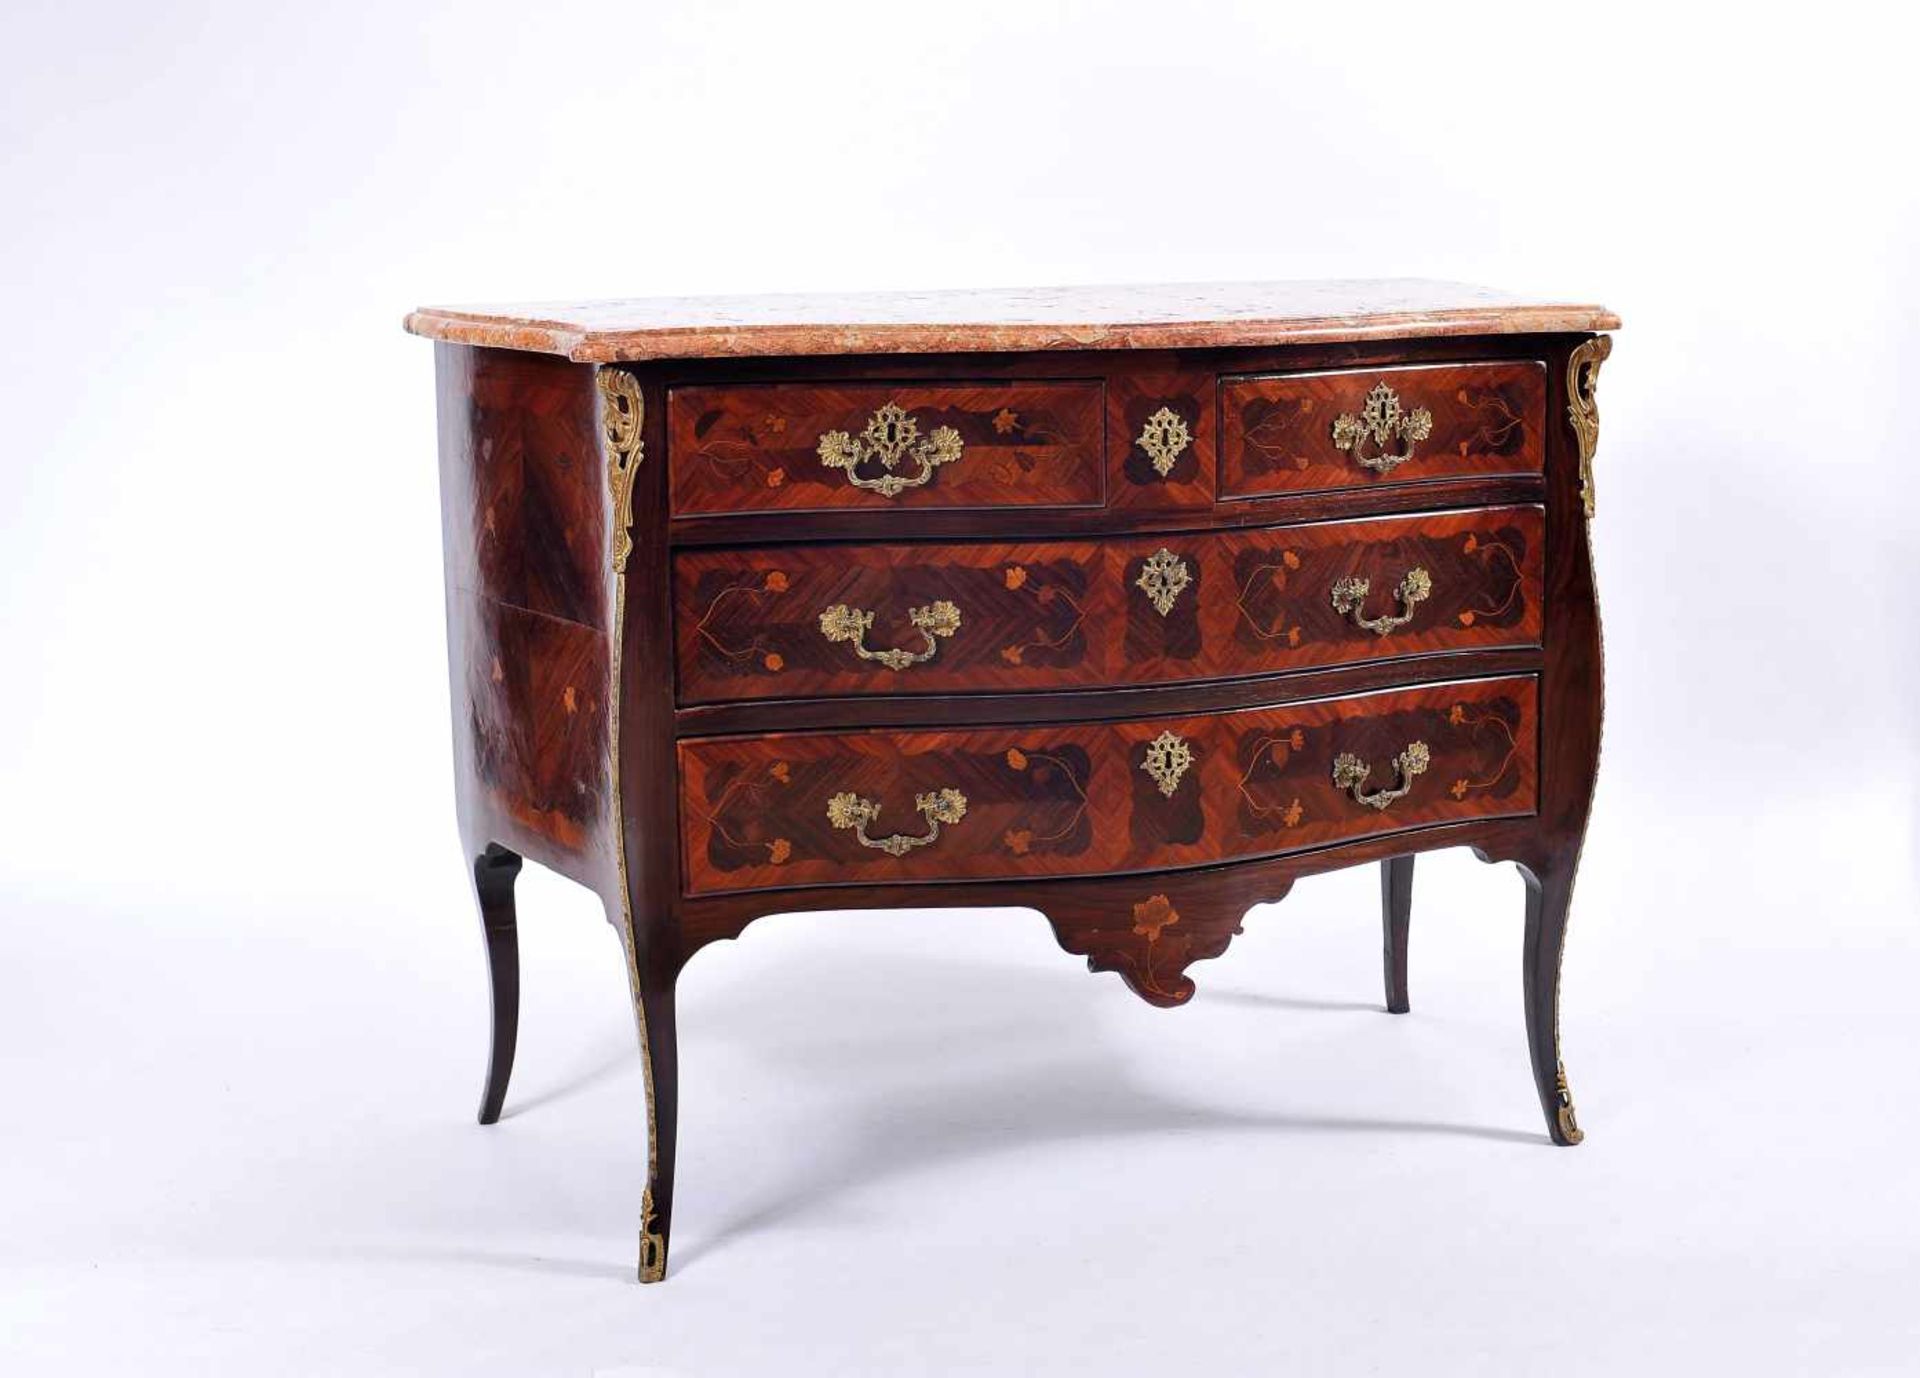 A Commode, Louis XV (1723-1774), Brazilian rosewood, kingwood, satinwood and boxwood marquetry,